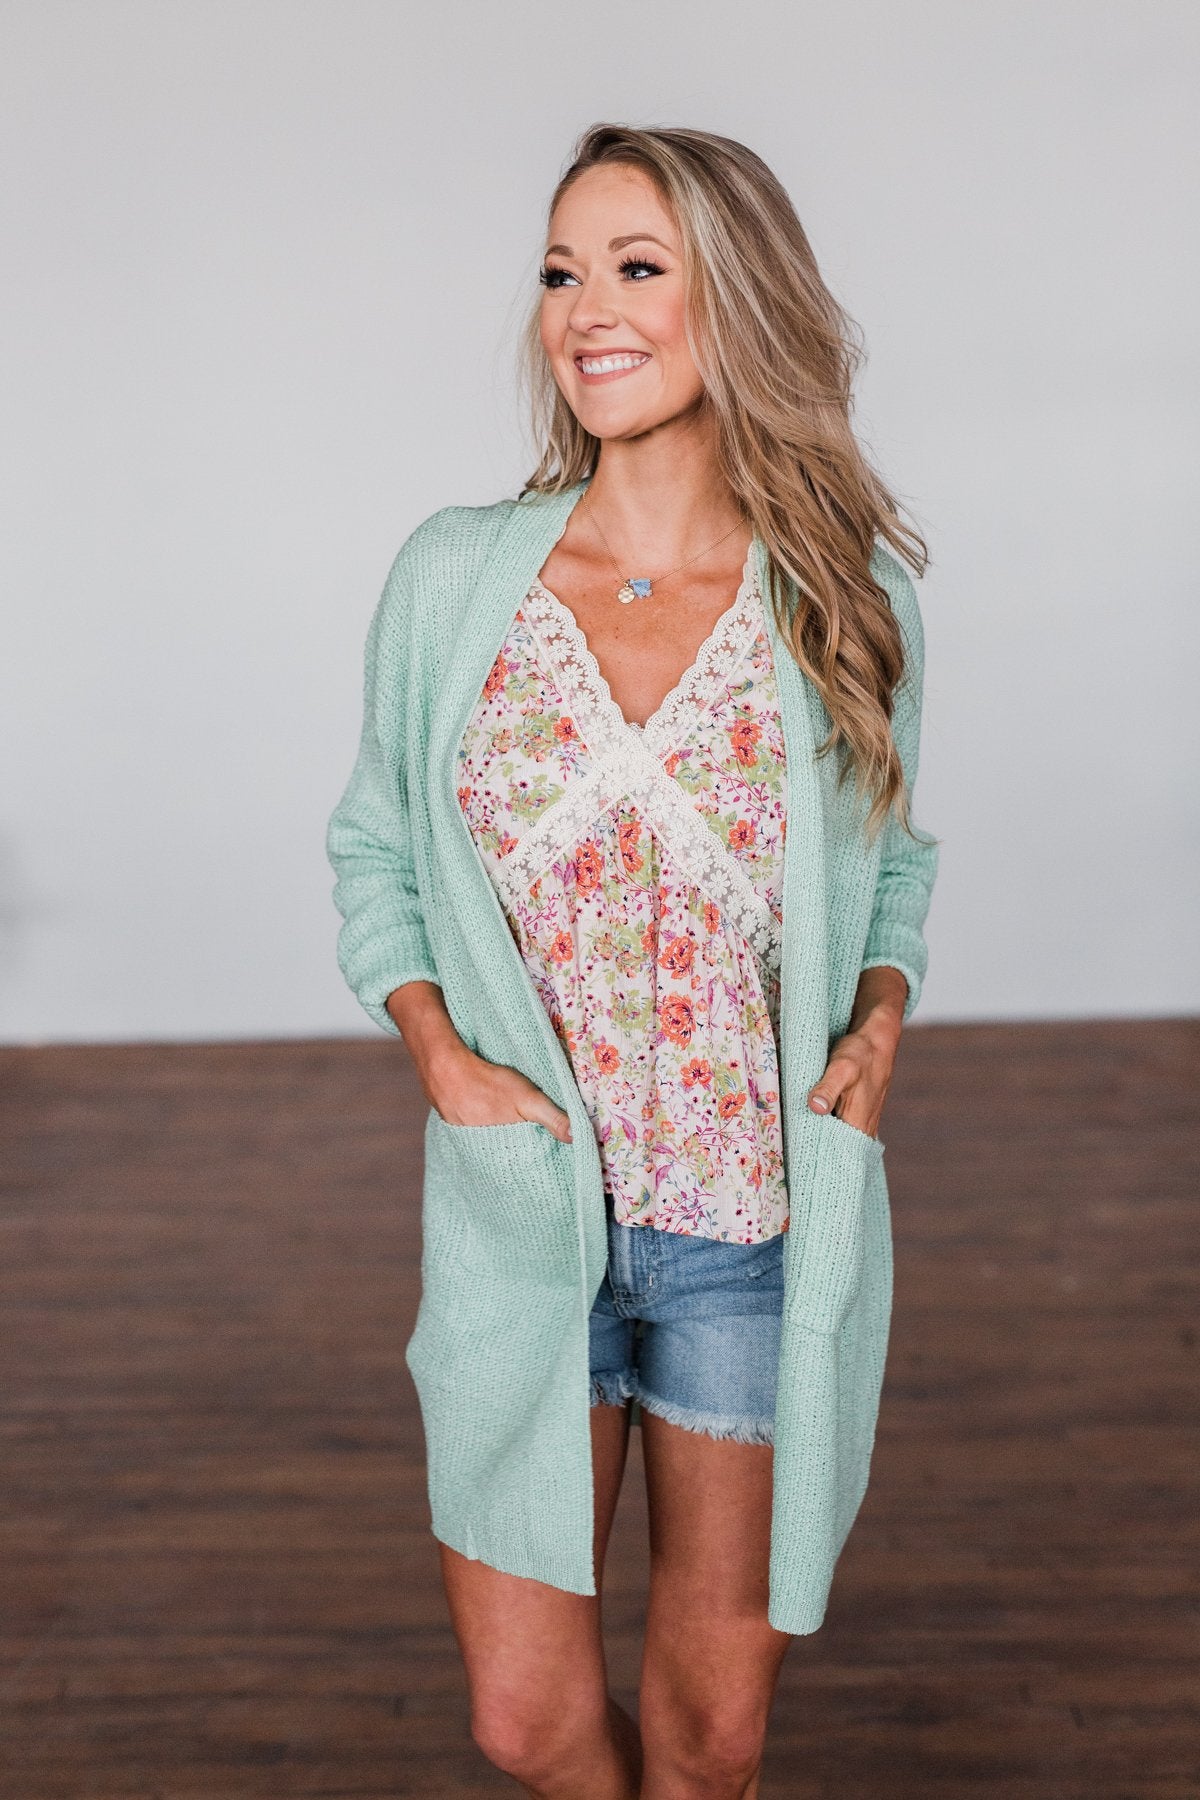 No Pressure Knitted Cardigan- Mint Green